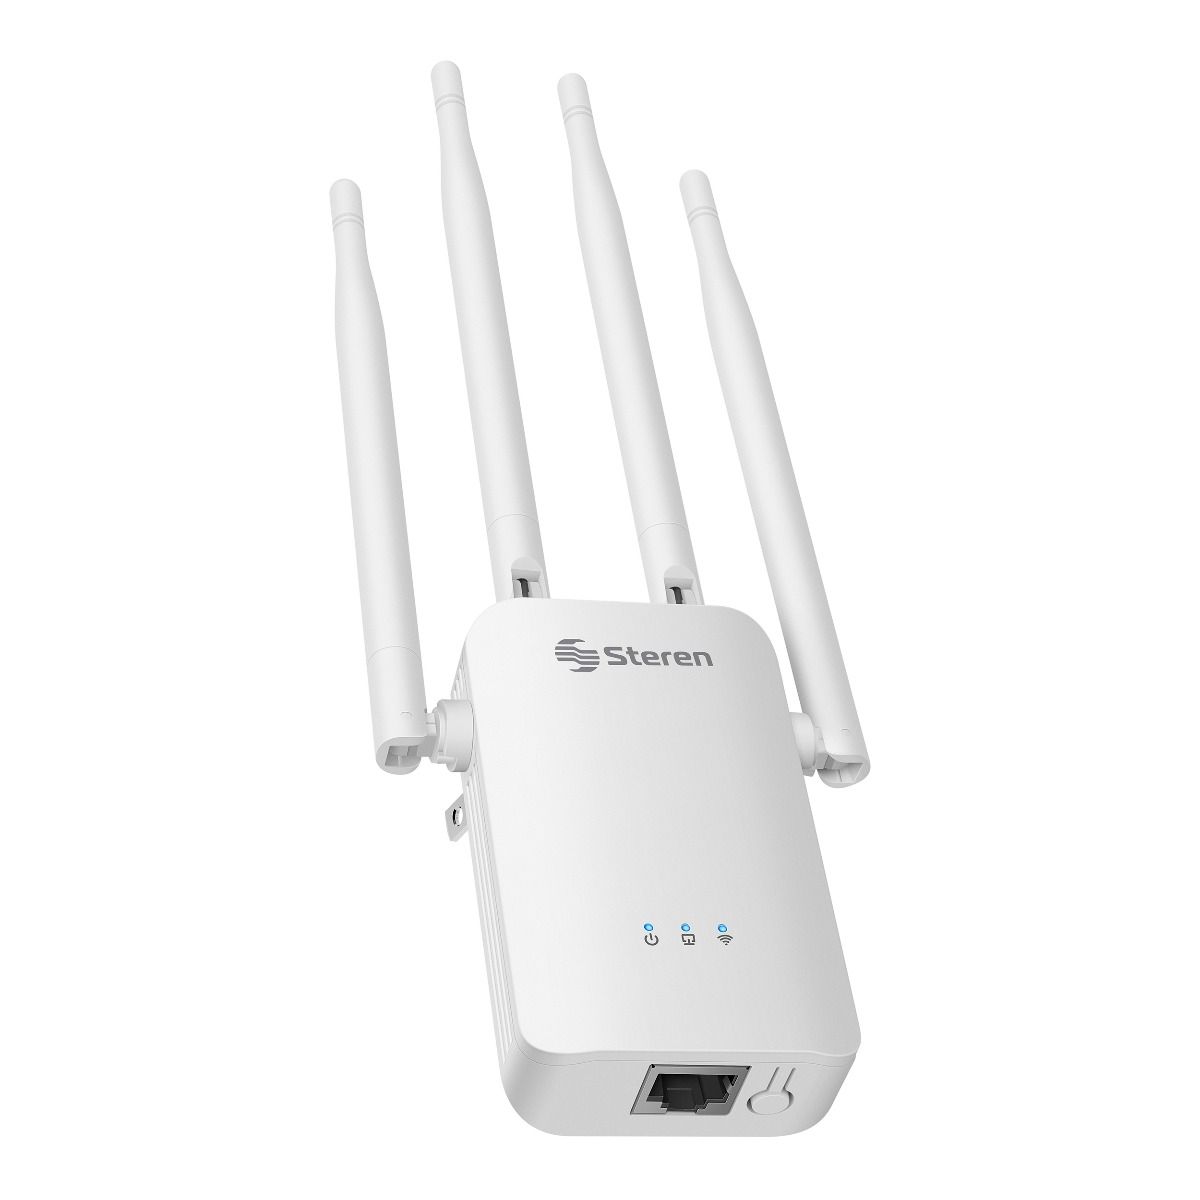 Repetidor / Router Wi-Fi 300 Mbps 2,4 GHz, hasta 30 m d